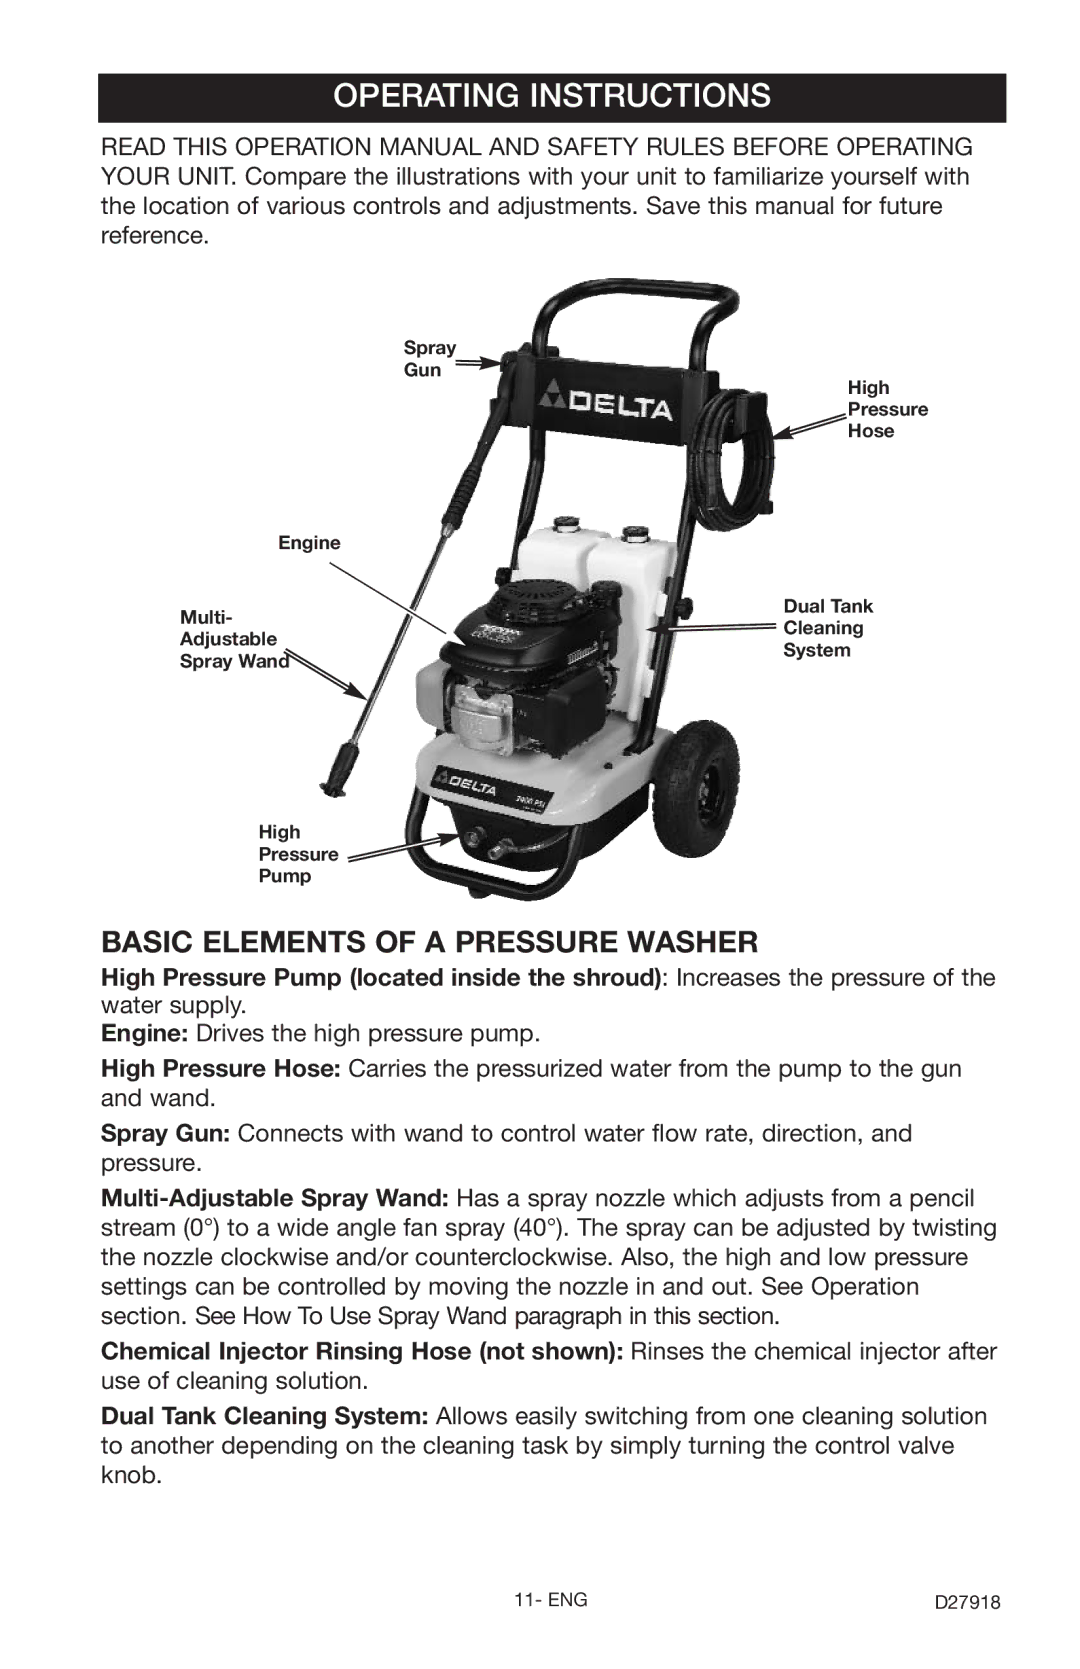 Delta DT2400CS instruction manual Operating Instructions, Basic Elements of a Pressure Washer 